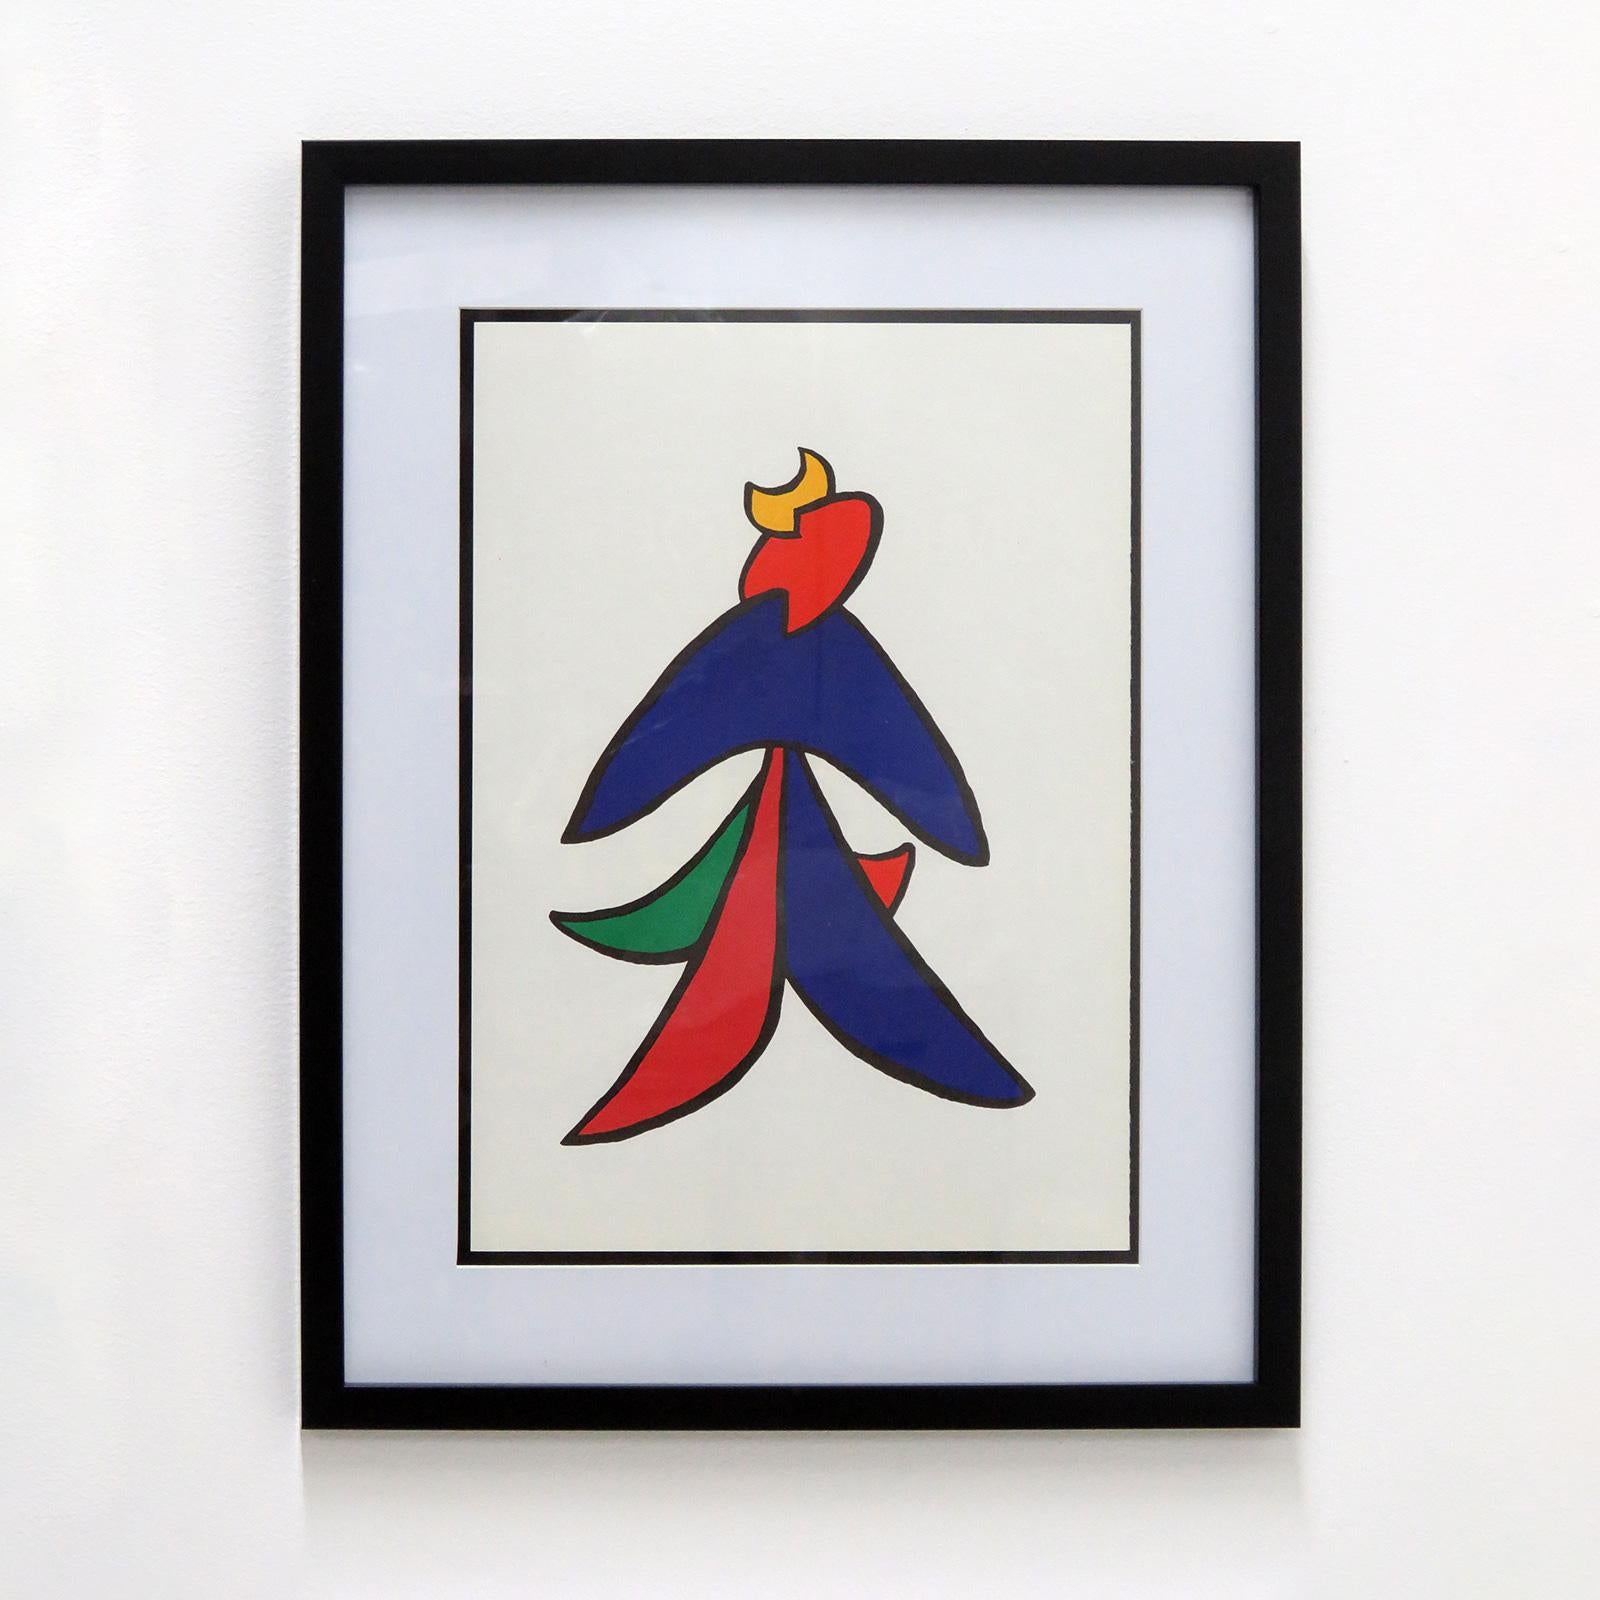 wonderful color lithography ' Dancer' from the stabiles series, printed in 1963 for Derriere le Miroir (issue number 141) by Alexander Calder from 1963, framed behind glass.

This is unsigned, as issued, and from the edition of at least 1500,